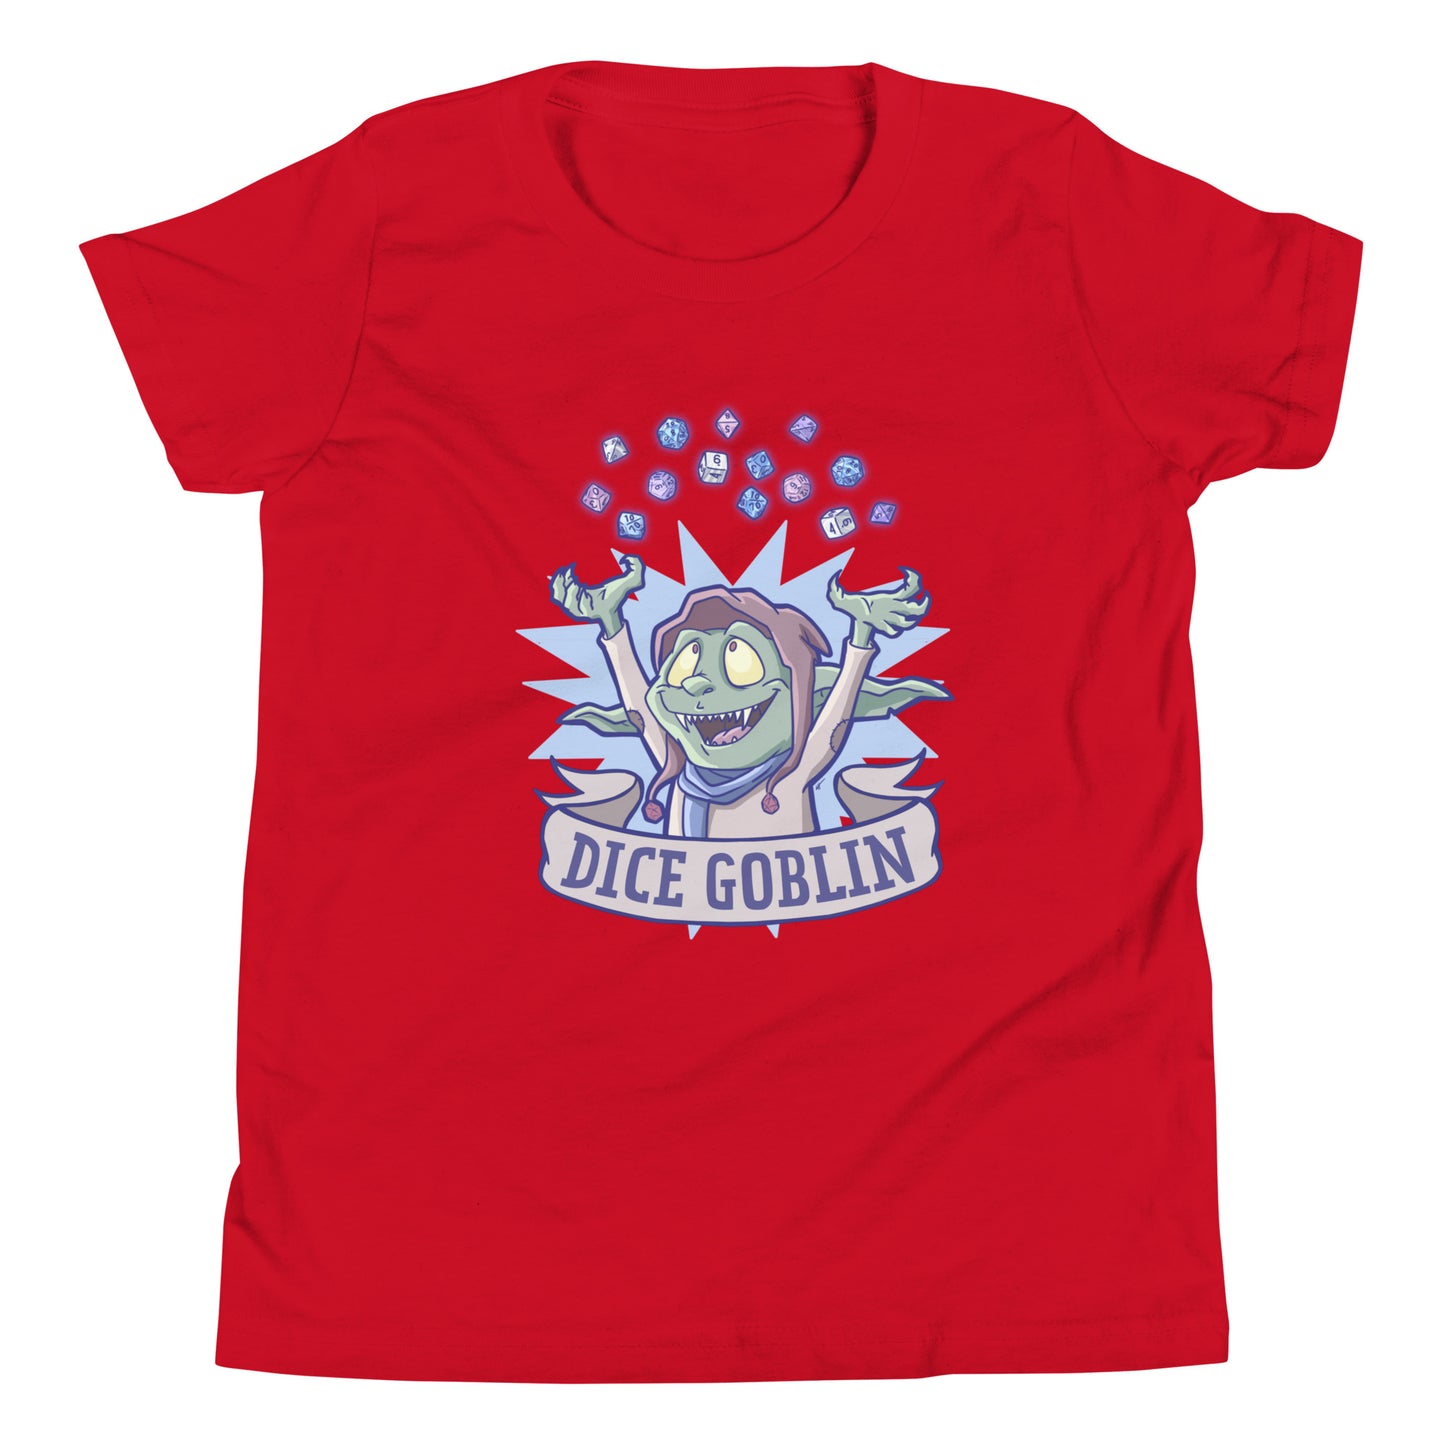 Dice Goblin Youth Short Sleeve T-Shirt  Level 1 Gamers Red S 